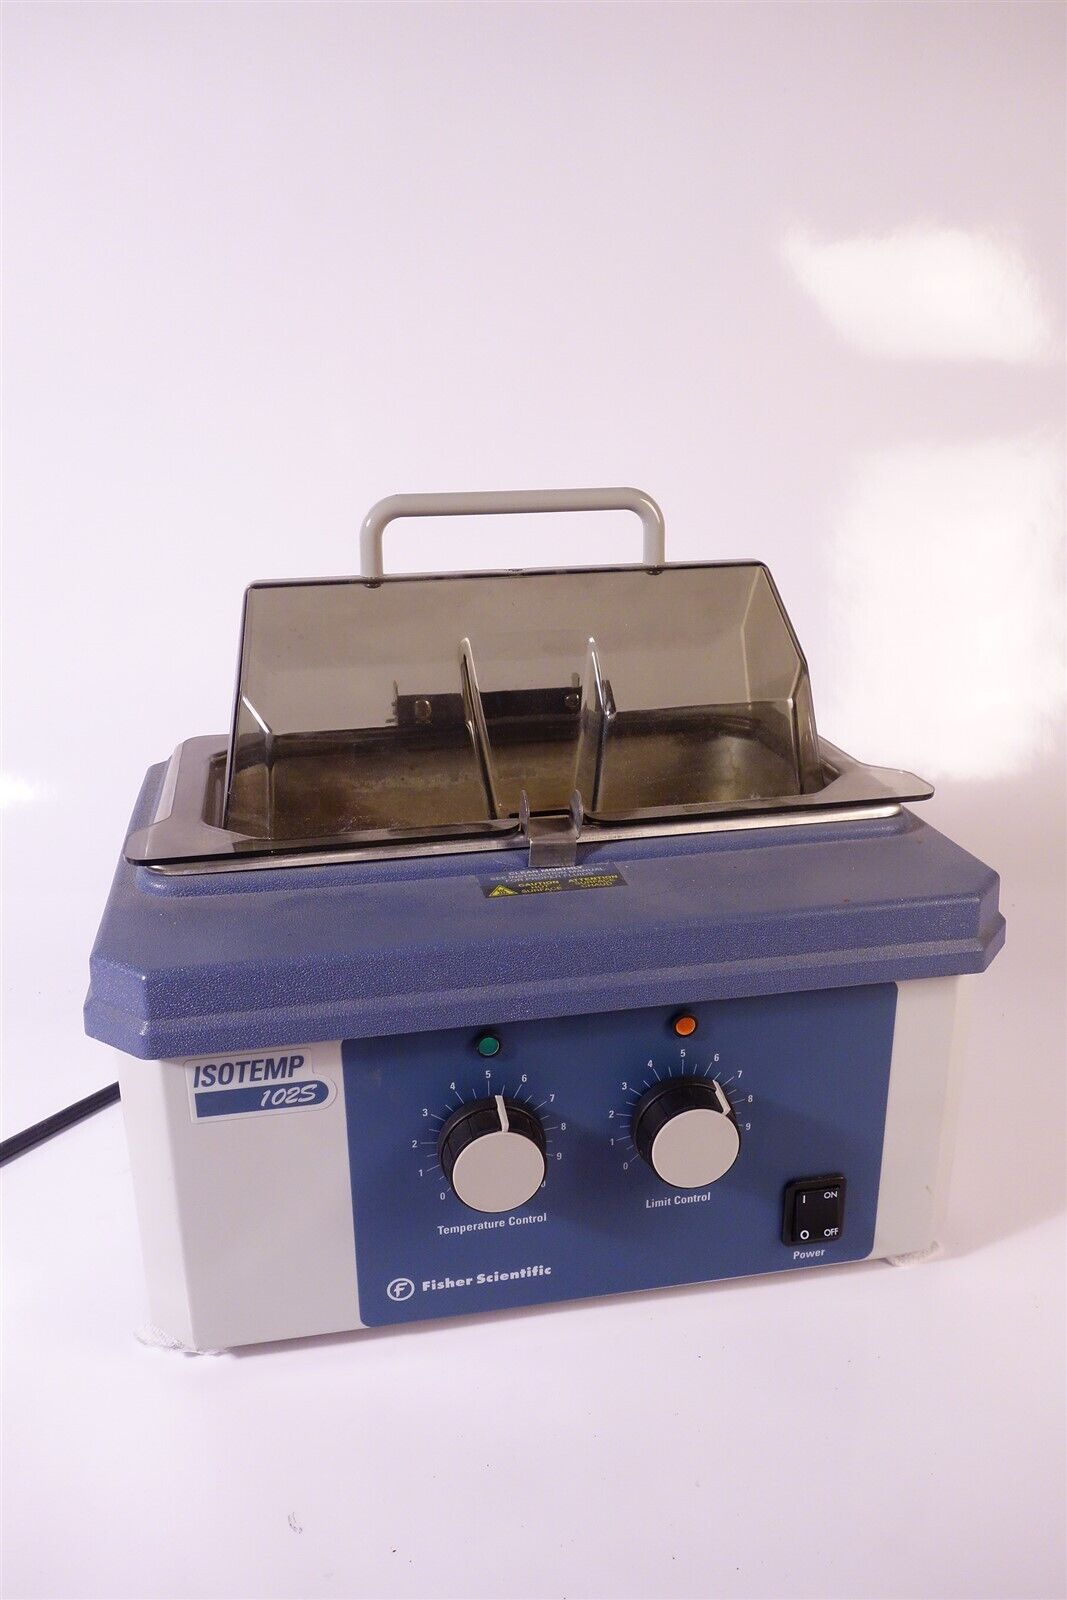 Fisher Scientific Isotemp 102s Water Bath - Tested Working 